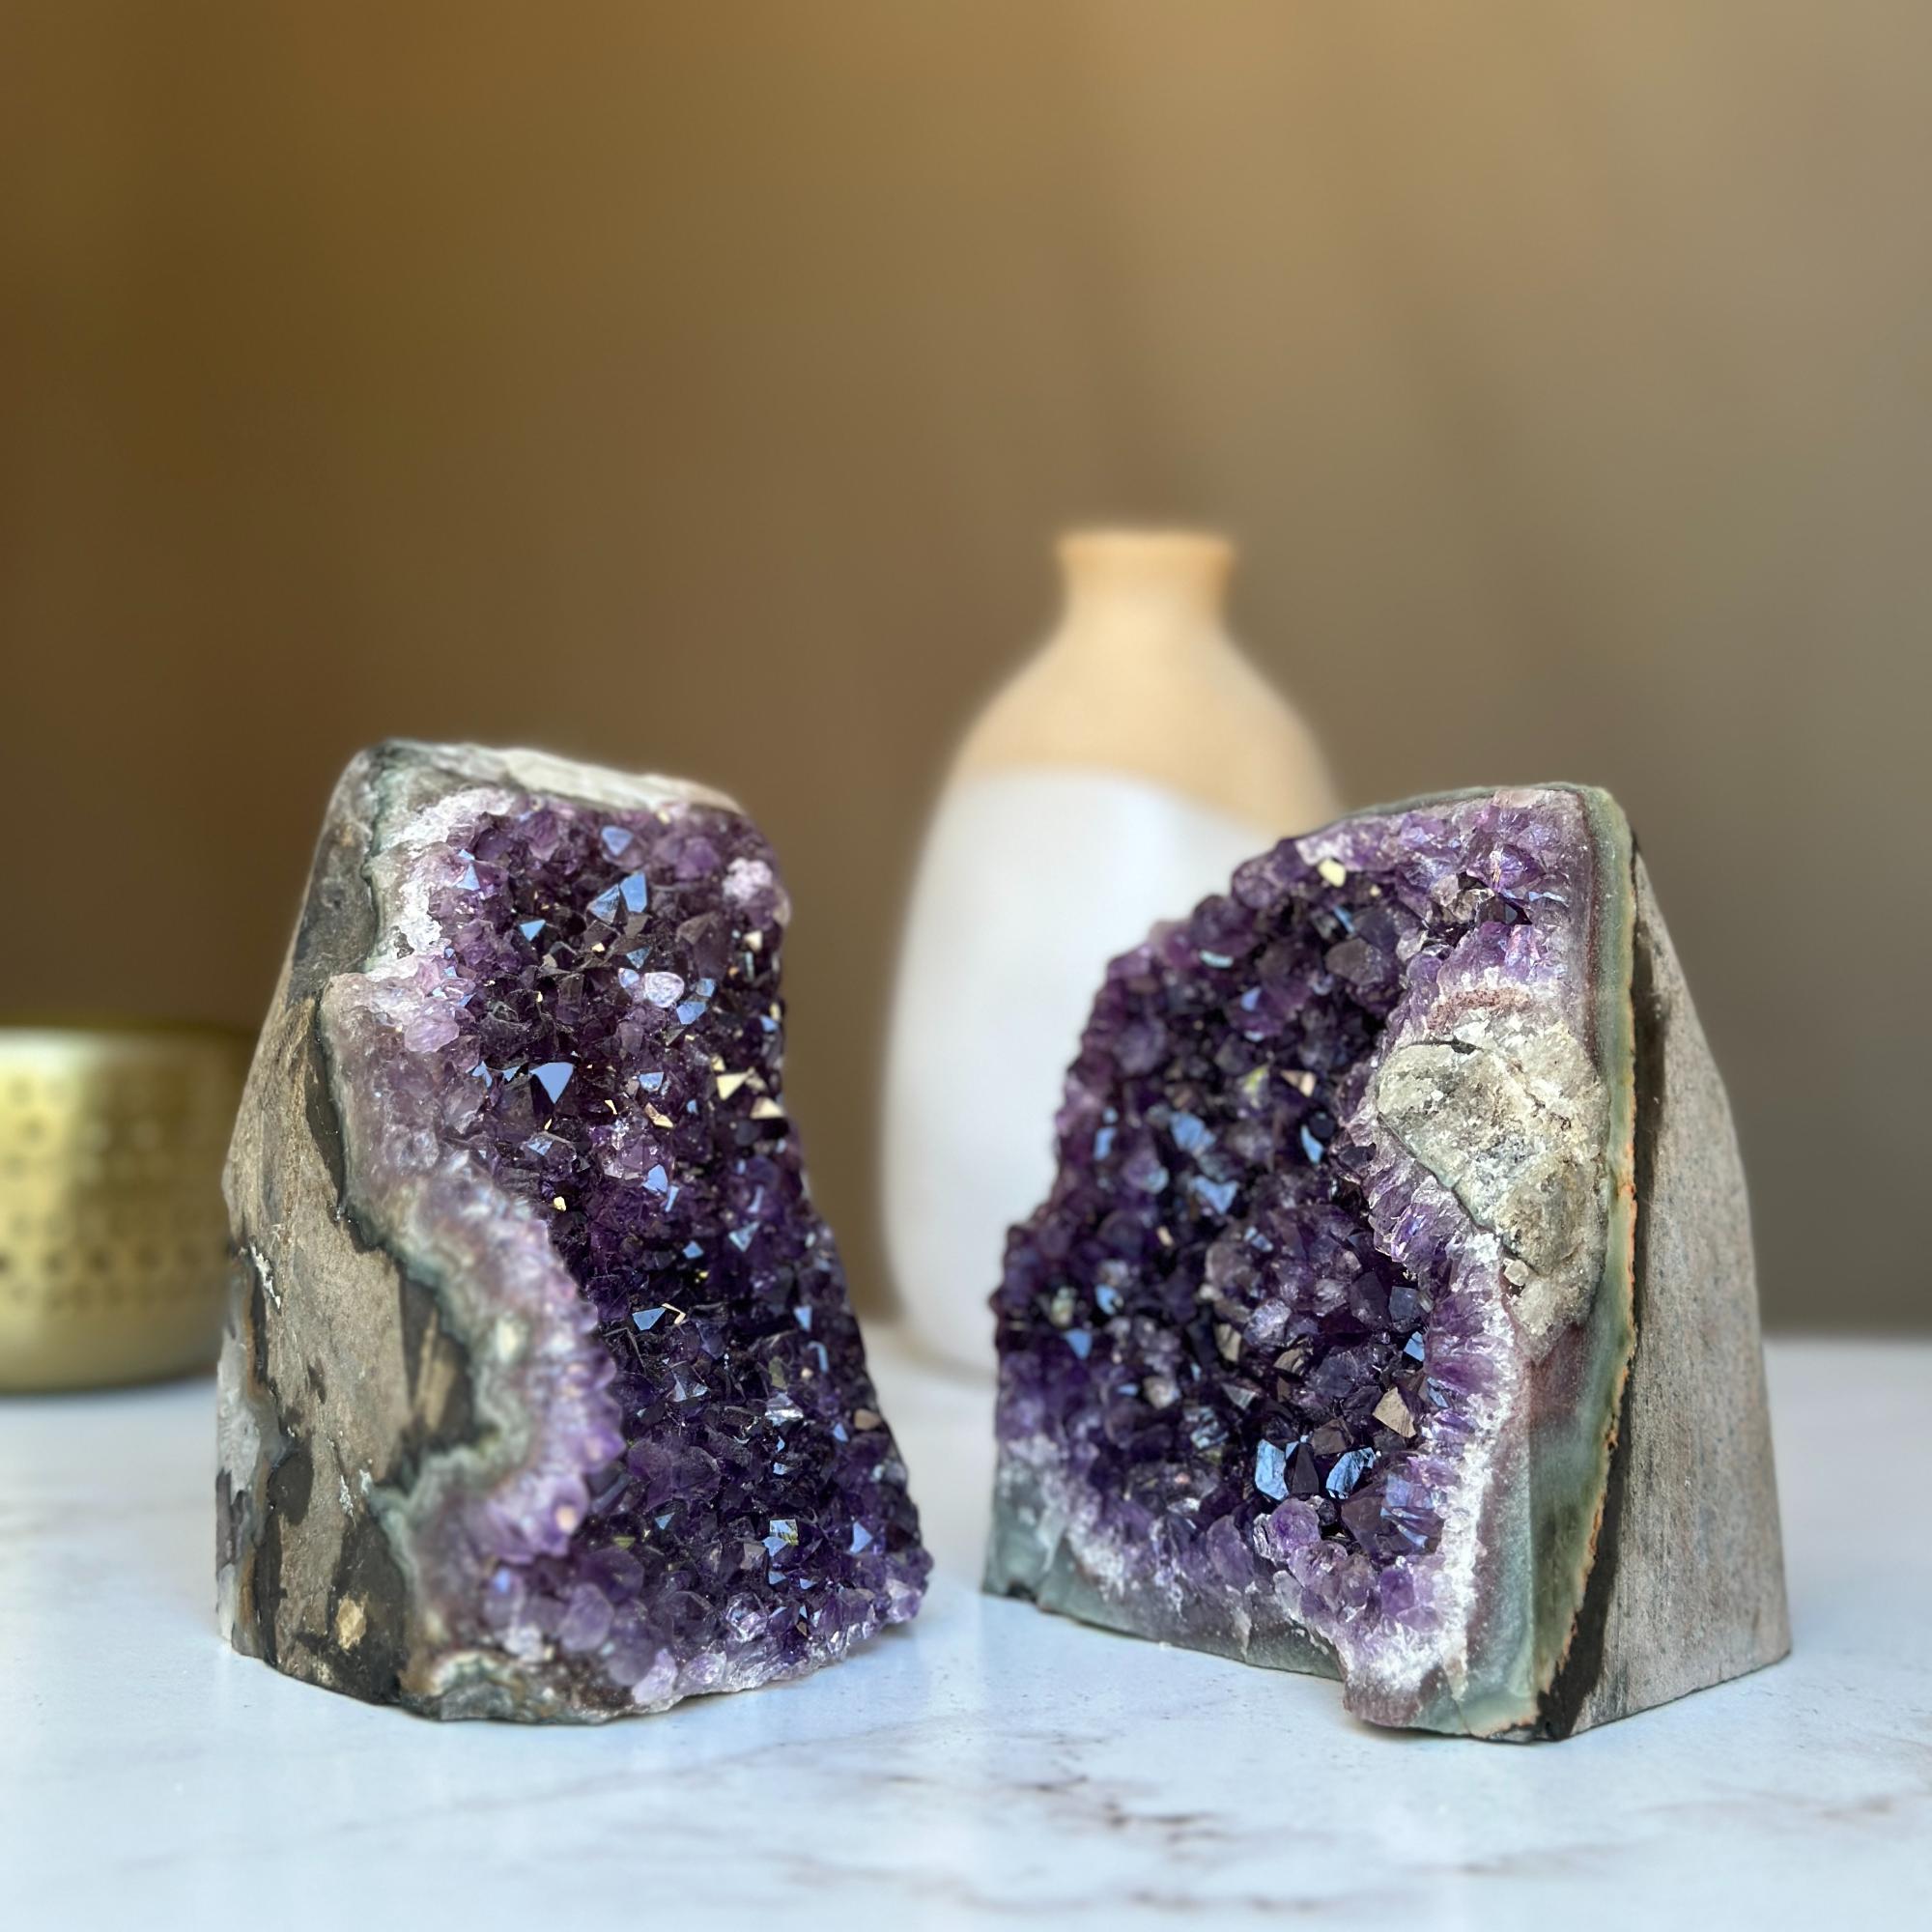 Stunning Amethyst Clusters with Sugar Calcite Formation, 2 pieces 4 Lbs